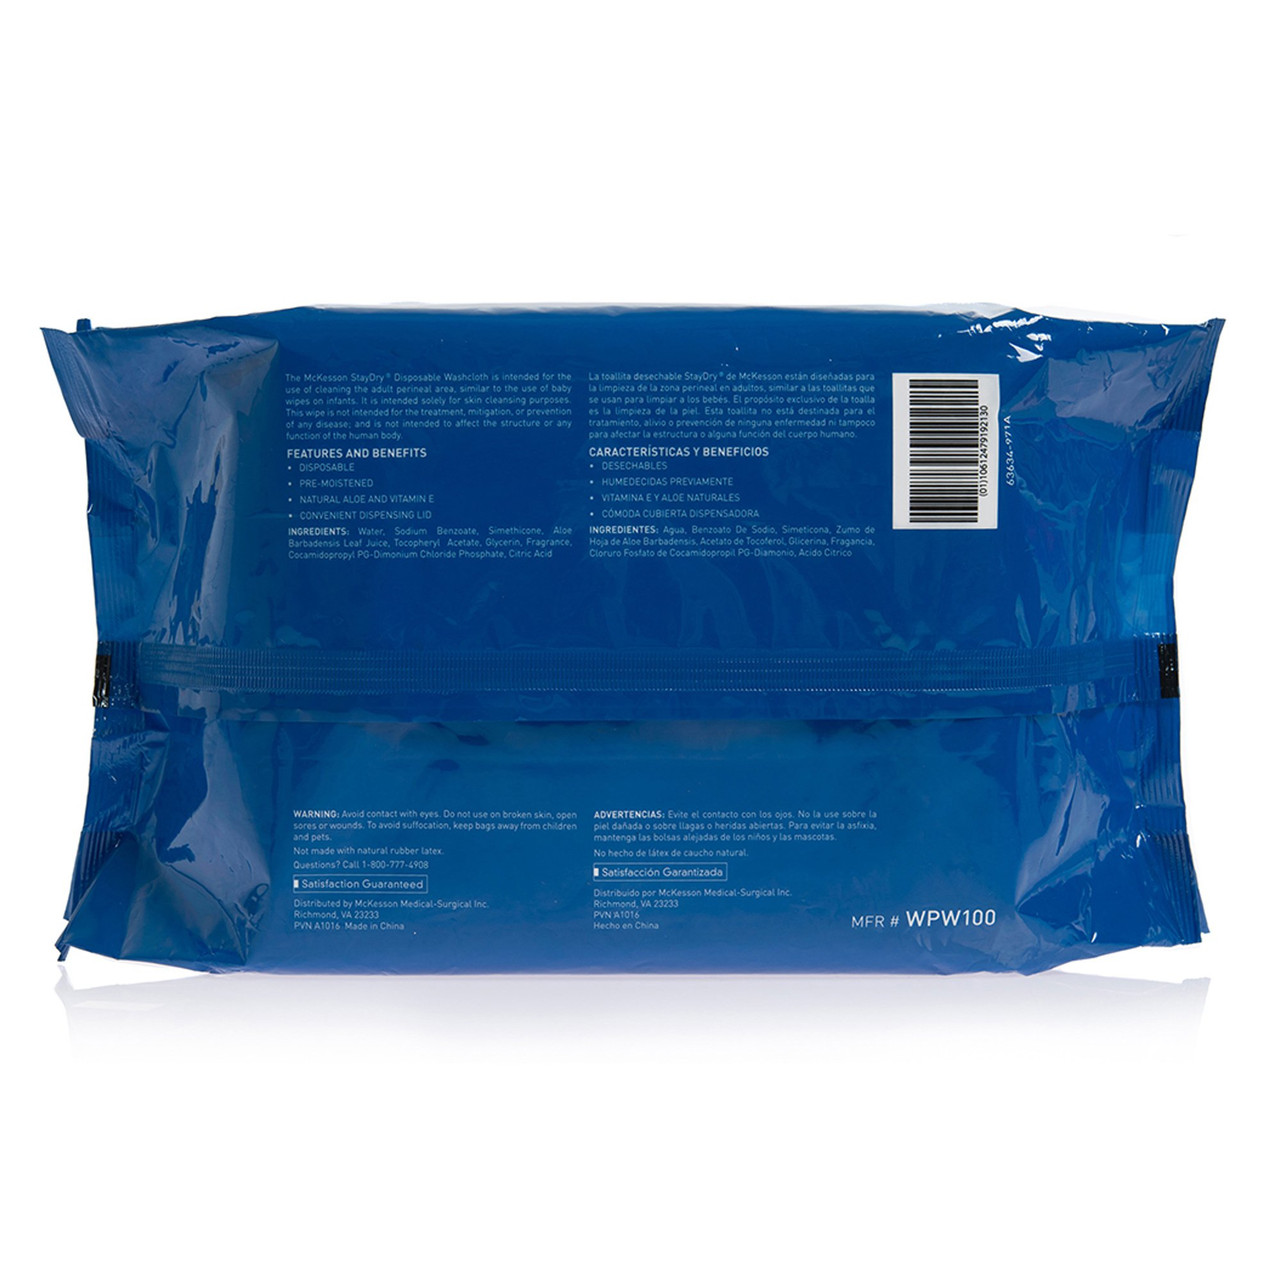 Get Individually Wrapped Disposable Cleaning Wipes – Tub O' Towels